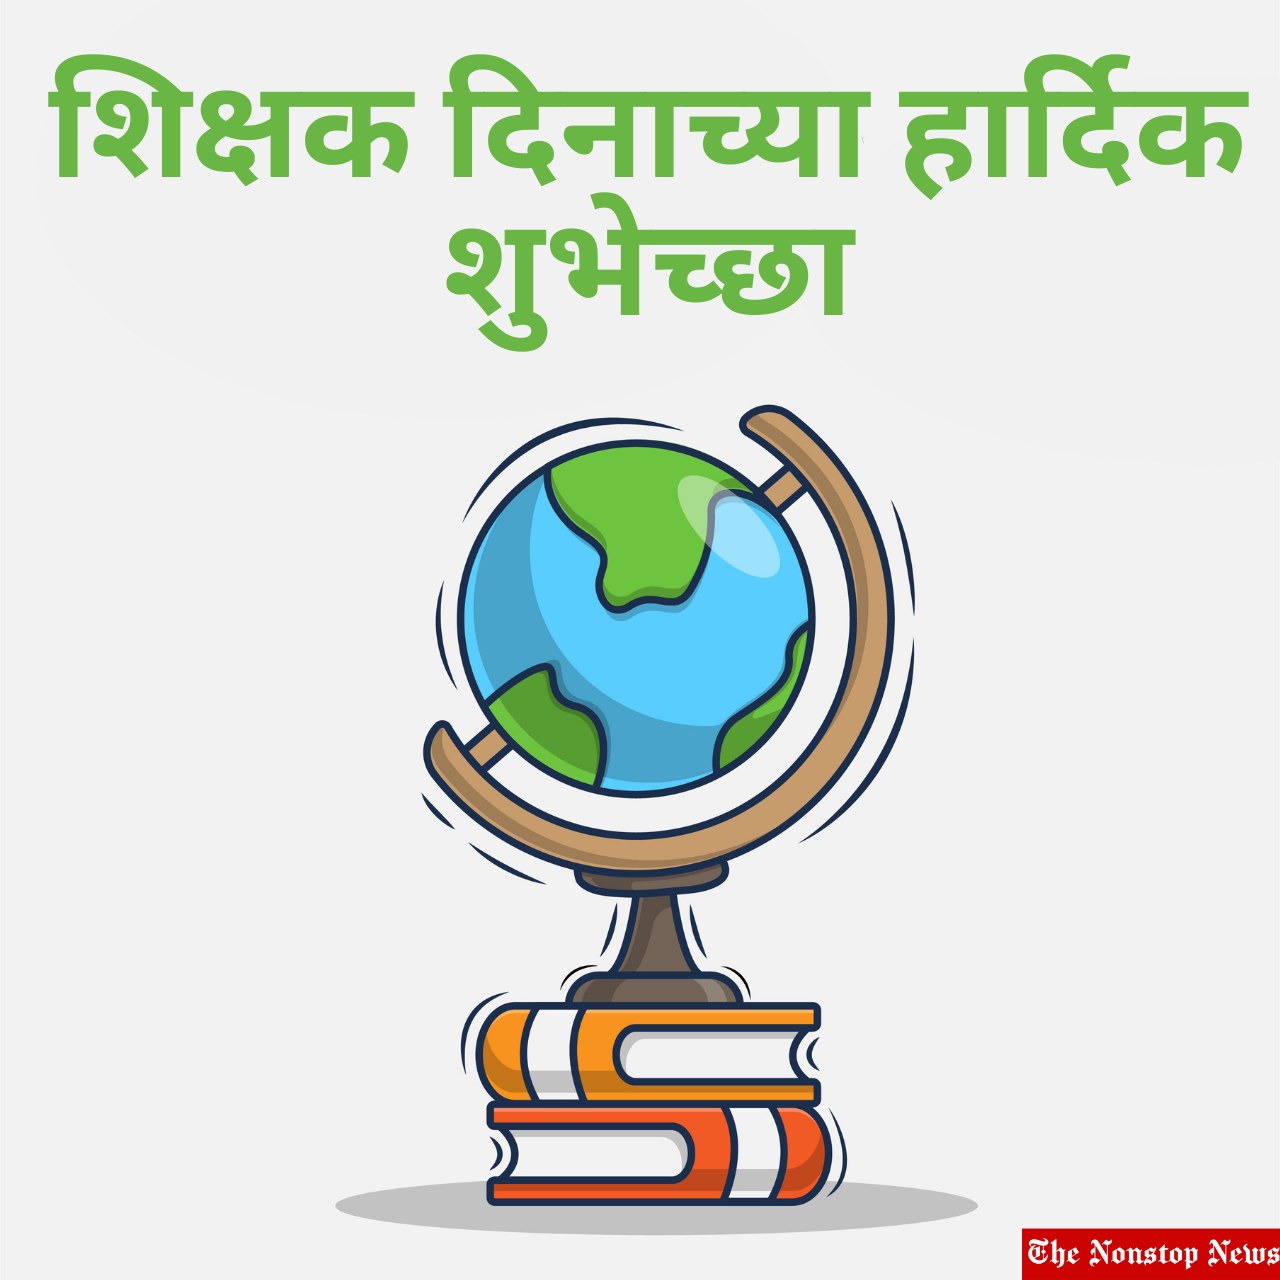 Happy Teacher's Day 2021 Marathi Images, Quotes, Wishes, Messages, and Greetings for your favorite teacher